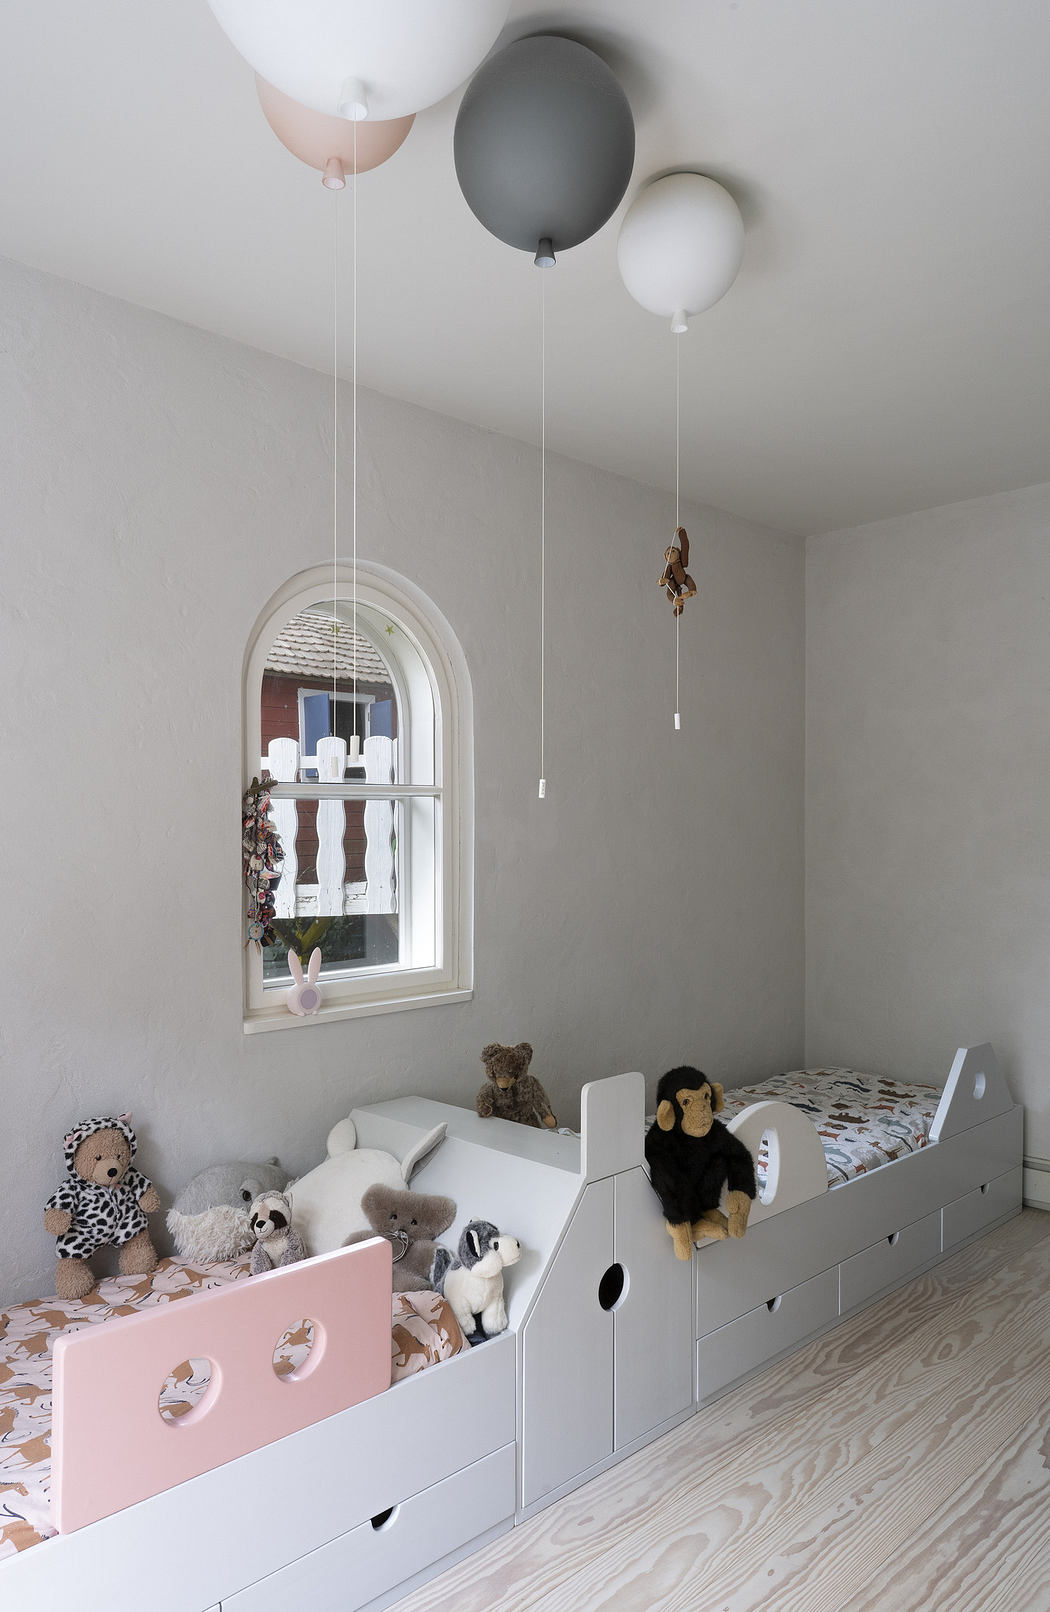 Minimalist children's room with a whimsical bed and balloon ceiling lights.